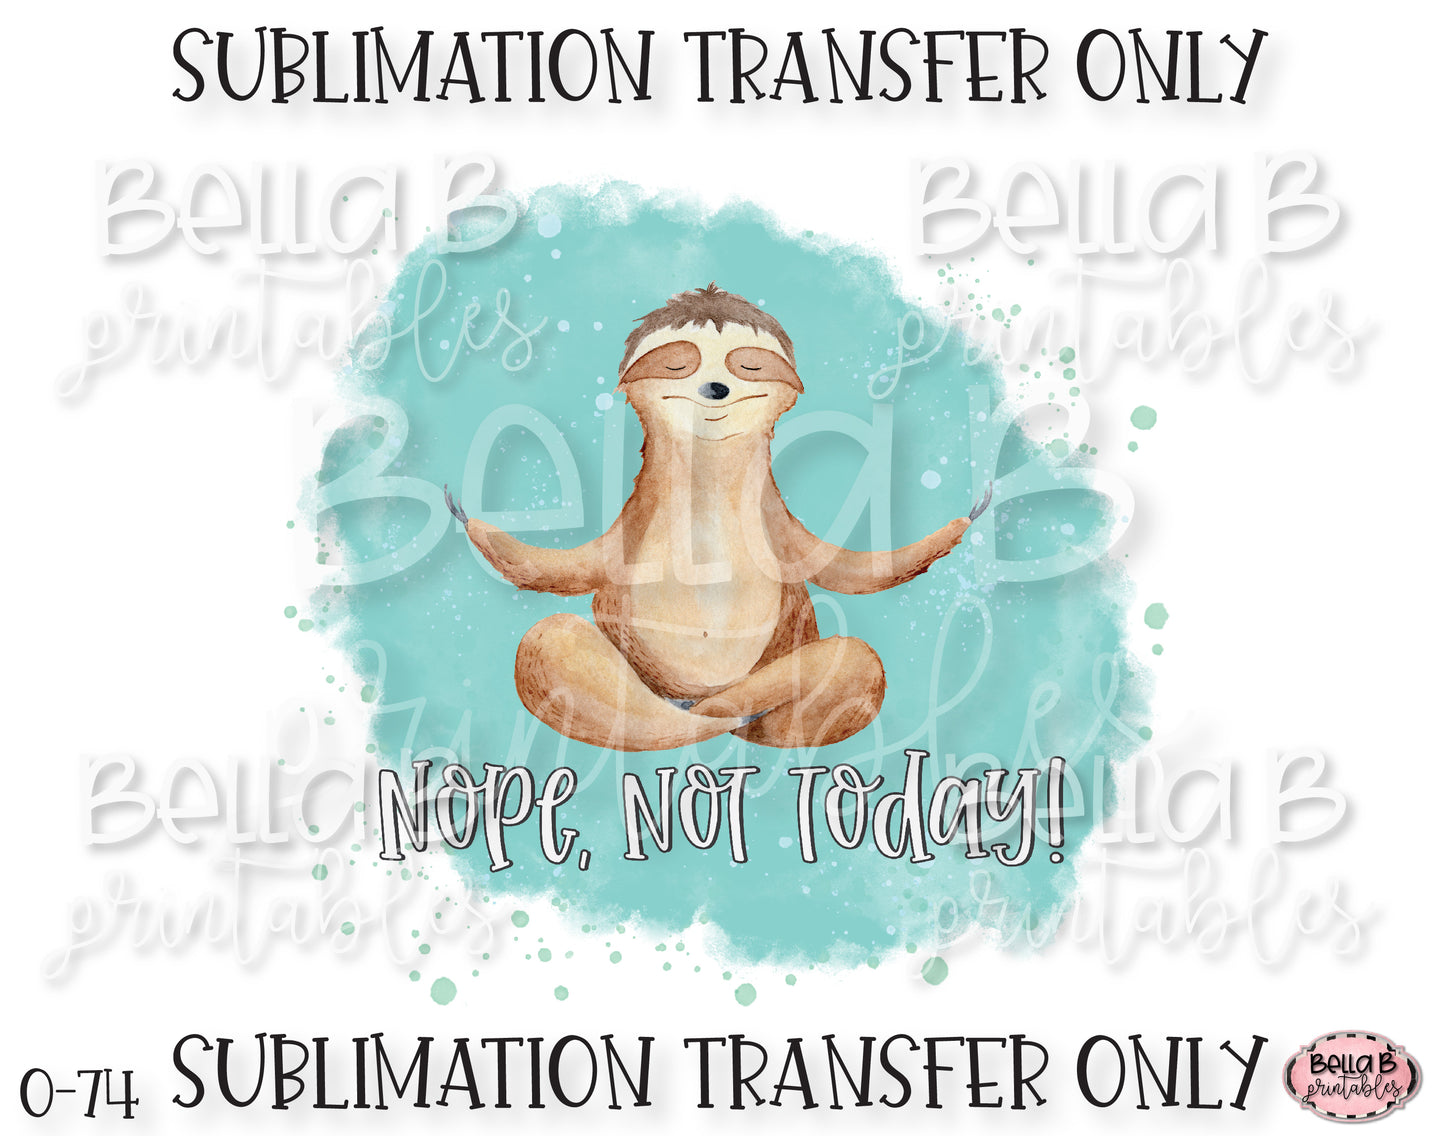 Sloth Nope Not Today Ready To Press, Heat Press Transfer, Sublimation Print